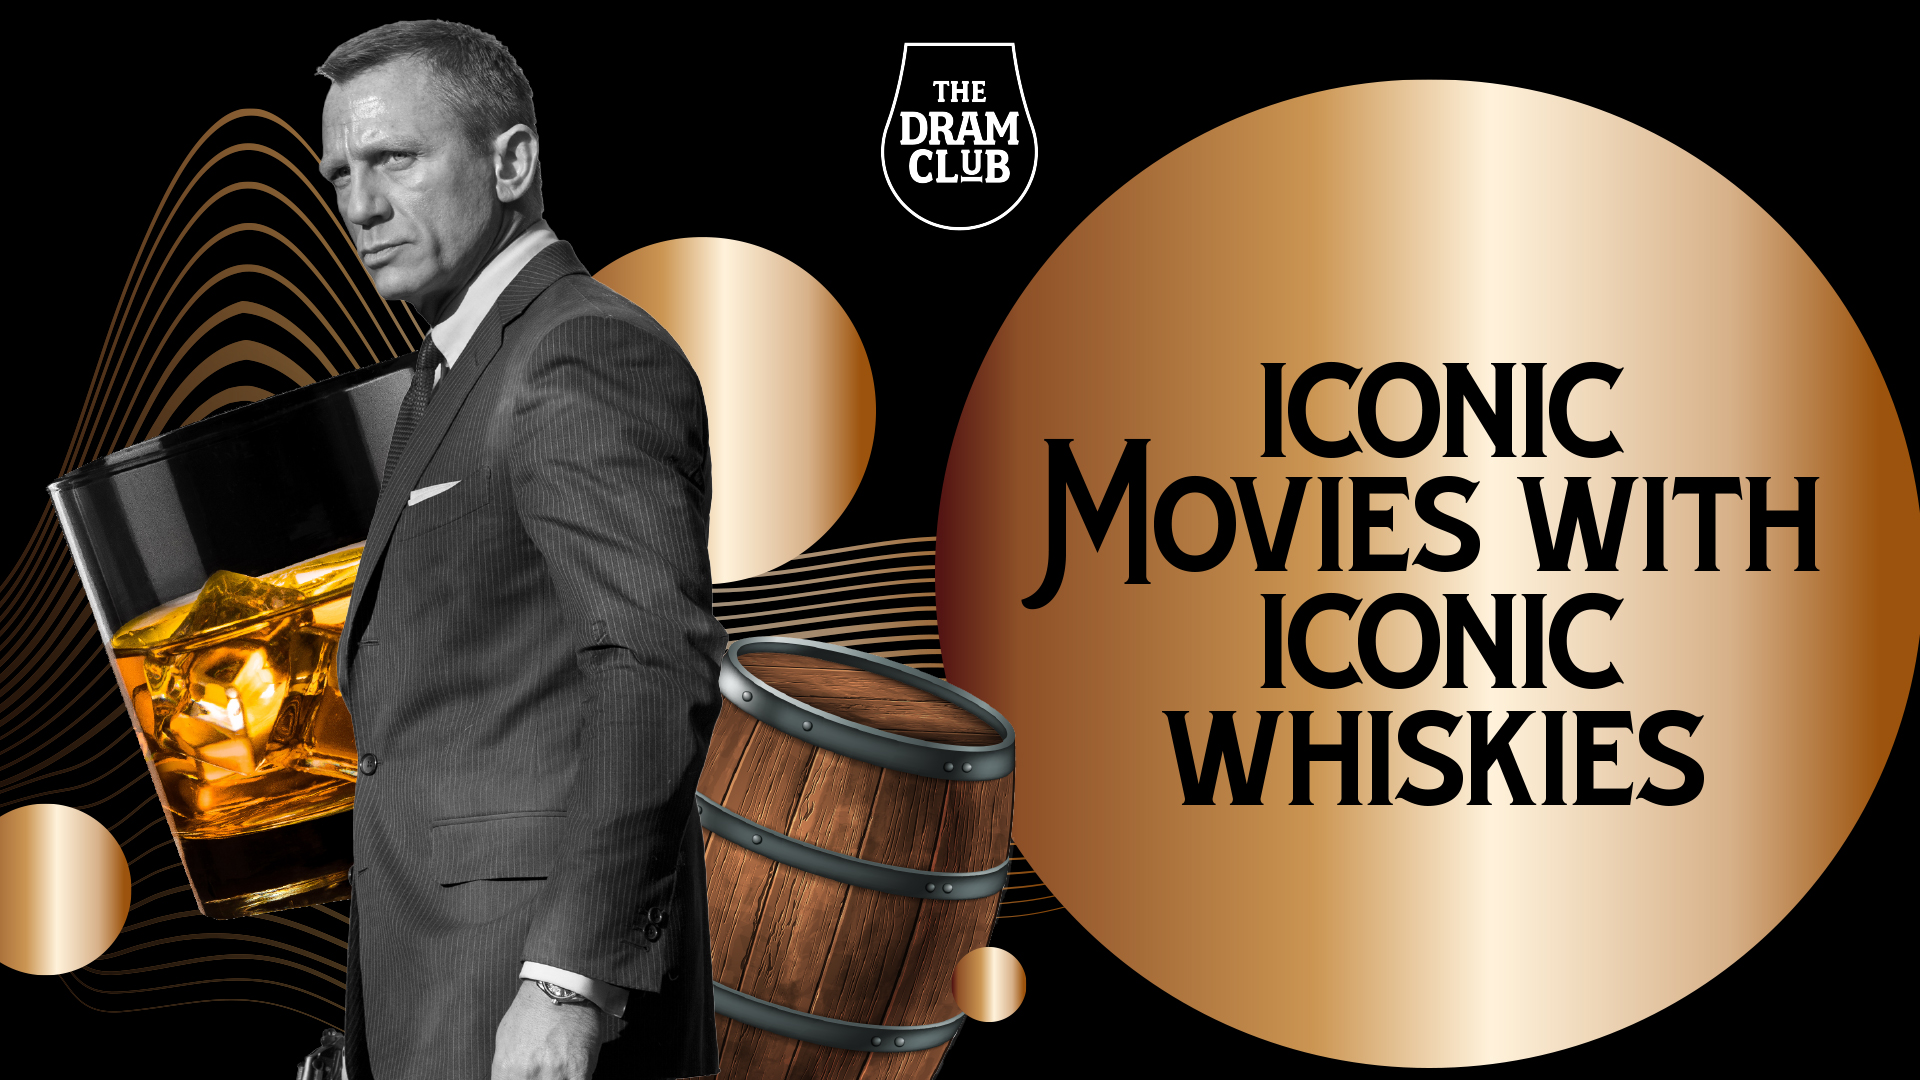 Iconic Movies with Iconic Whiskies